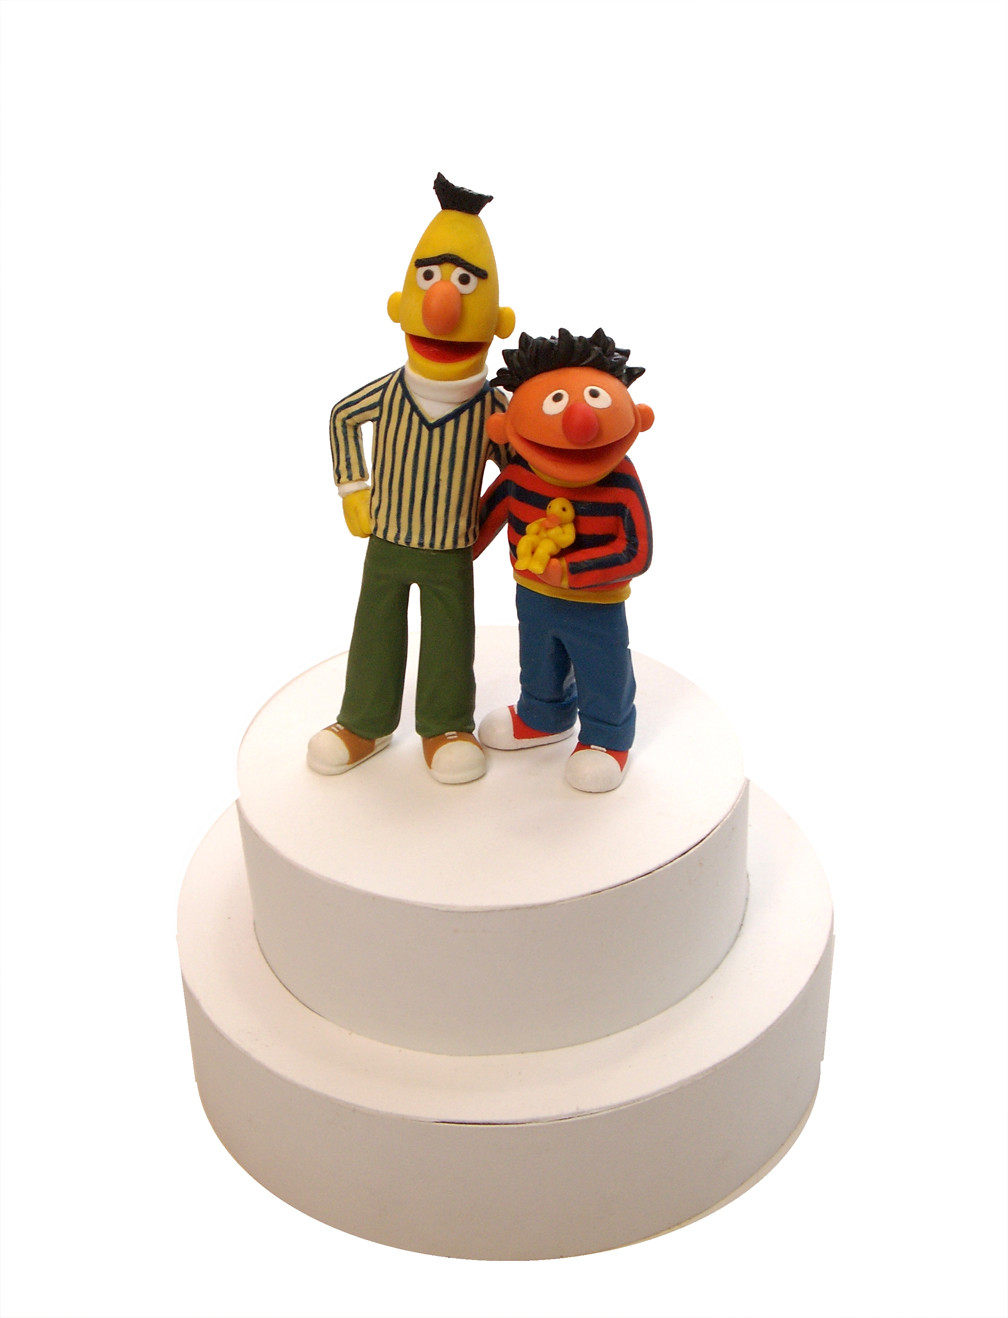 Gay Cake Toppers For Wedding Cakes
 Gay Cakes Consumption Cake Toppers and the New Wedded